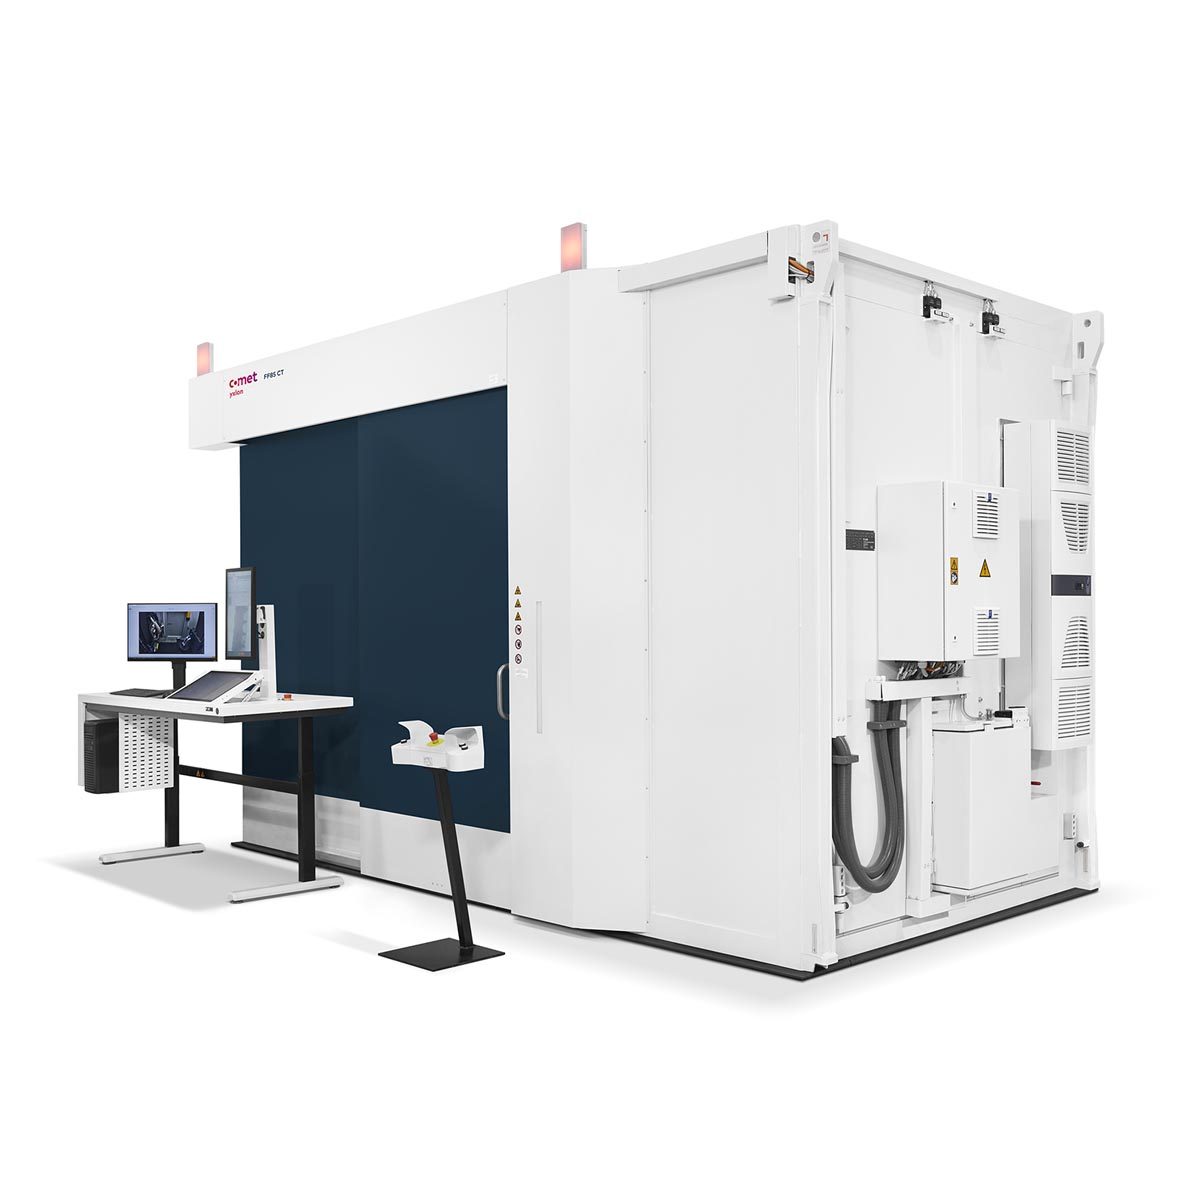 Coment Yxlon FF85 Computed Tomography inspection system